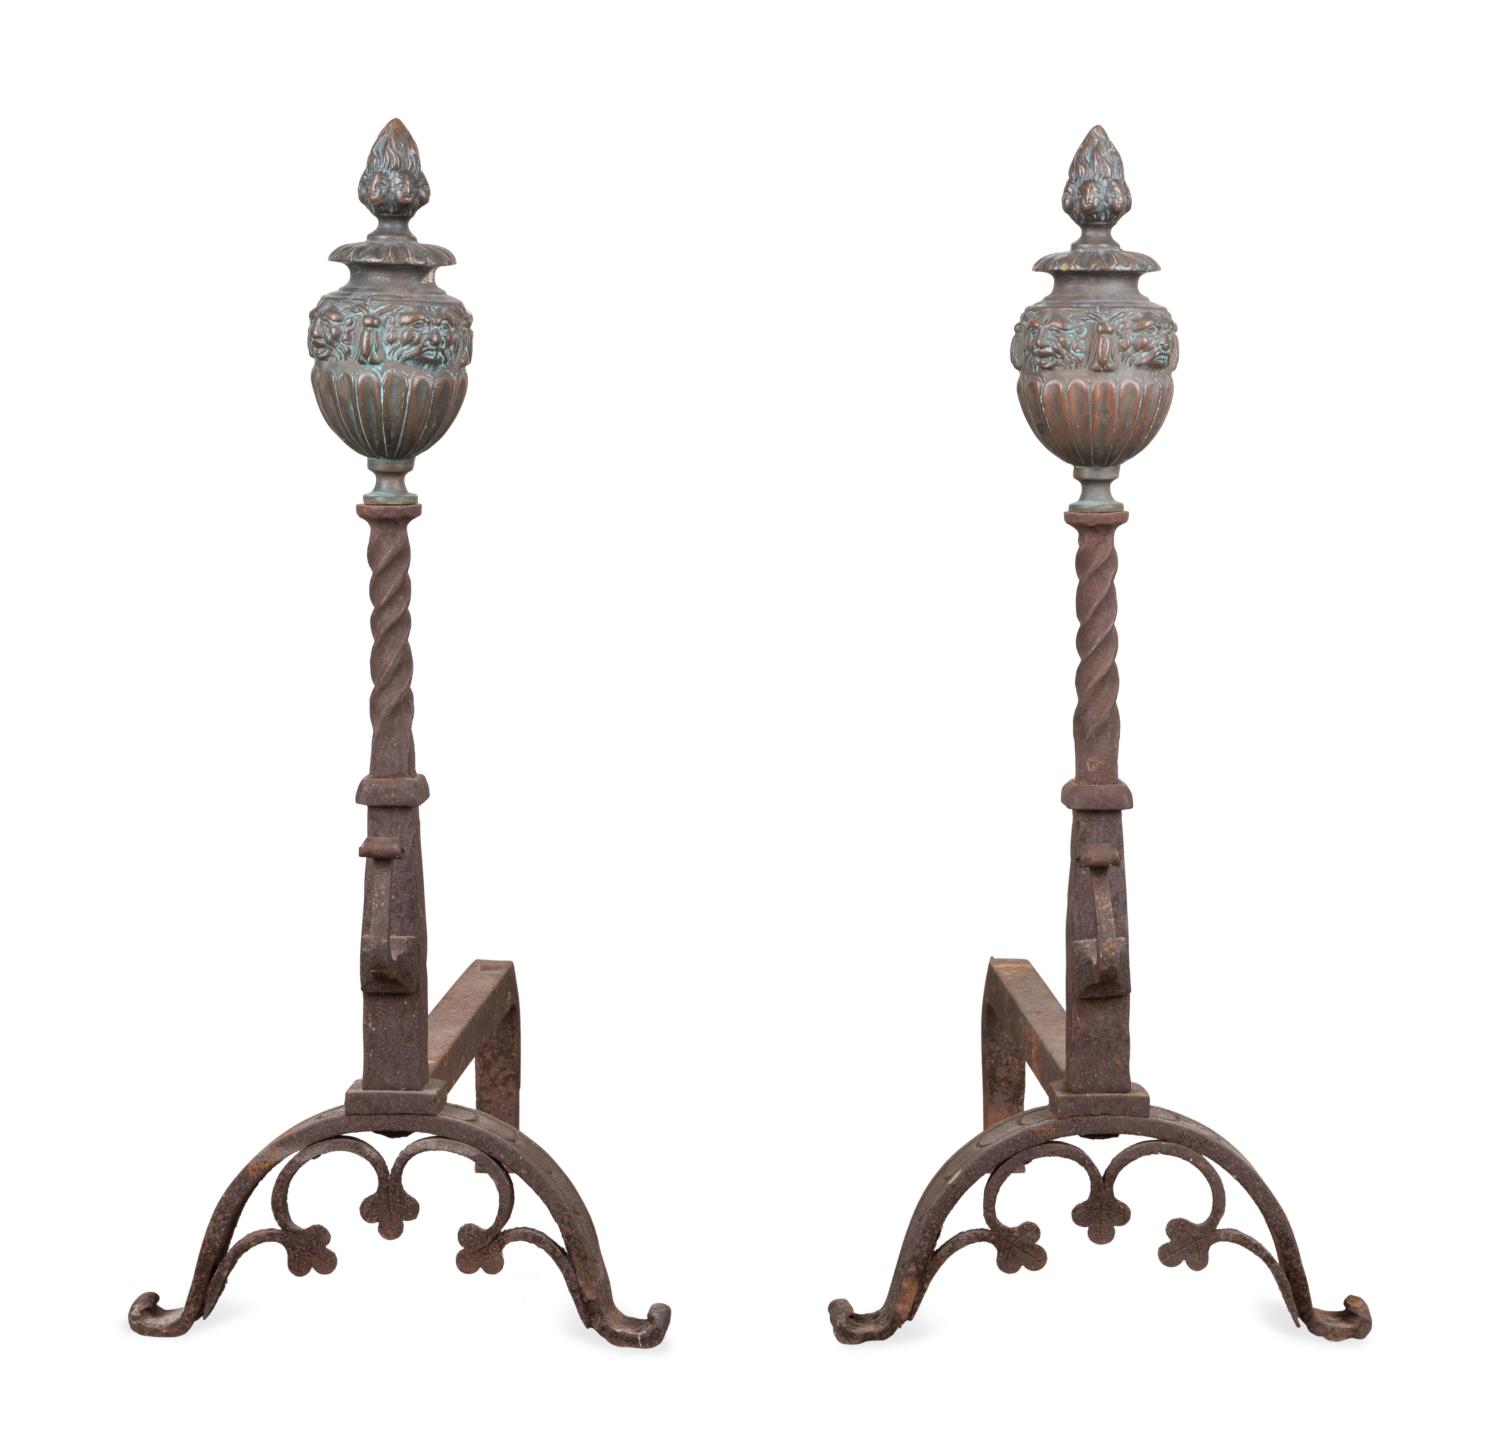 PAIR FLAMING URN ANDIRONS IN THE 2f9893